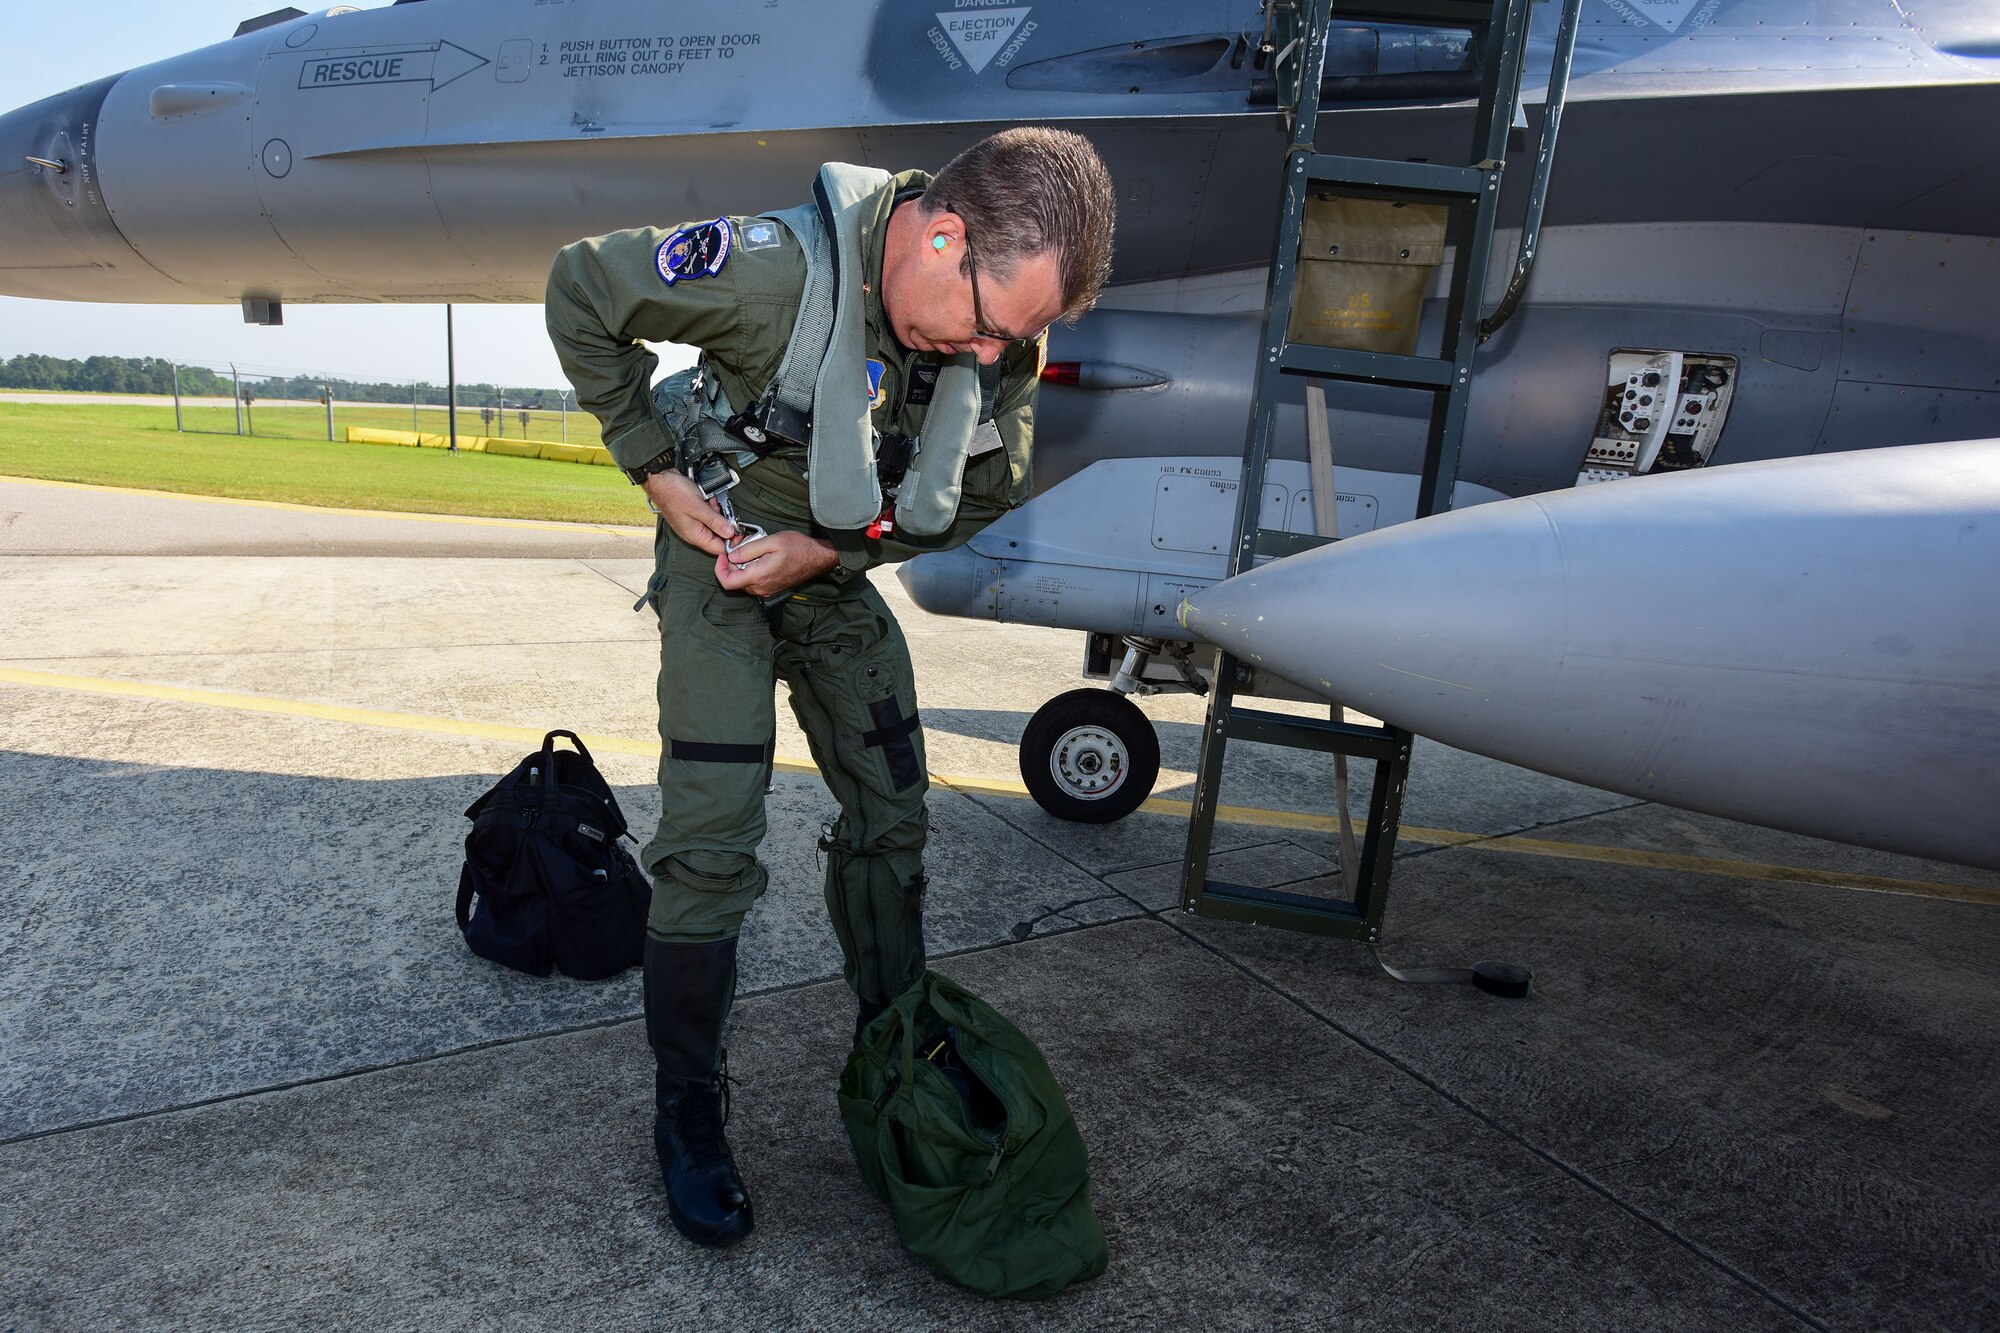 U.S. Civil Air Patrol Lt. Col. Brett Grooms, the legislative commander of the Civil Air Patrol's South Carolina Wing, secures his flight-suit gear prior to an aerospace control alert familiarization flight in an F-16 Fighting Falcon fighter jet from the 169th Fighter Wing here June 11. The 169th FW712, in close coordination with the Continental U.S. North American Aerospace Defense Command Region, the Eastern Air Defense Sector and the Federal Aviation Administration had recently hosted a Southeast Aerospace Control Alert June 5-7 but weather delays precluded Grooms from flying during the actual SACA event. The conference was a total team training initiative to improve homeland defense capabilities by developing techniques with joint forces during small-scale exercises. This conference consisted of South Carolina Air National Guard 169FW F-16 fighter jets, U.S. Coast Guard Rotary Wing Air Intercept Squadron MH-65D Dolphin helicopters from USCG Air Station Atlantic City and South Carolina Wing Civil Air Patrol aircraft and crews to hone their skills with tactical-level air-intercept procedures. (U.S. Air National Guard photo by Senior Airman Megan Floyd)